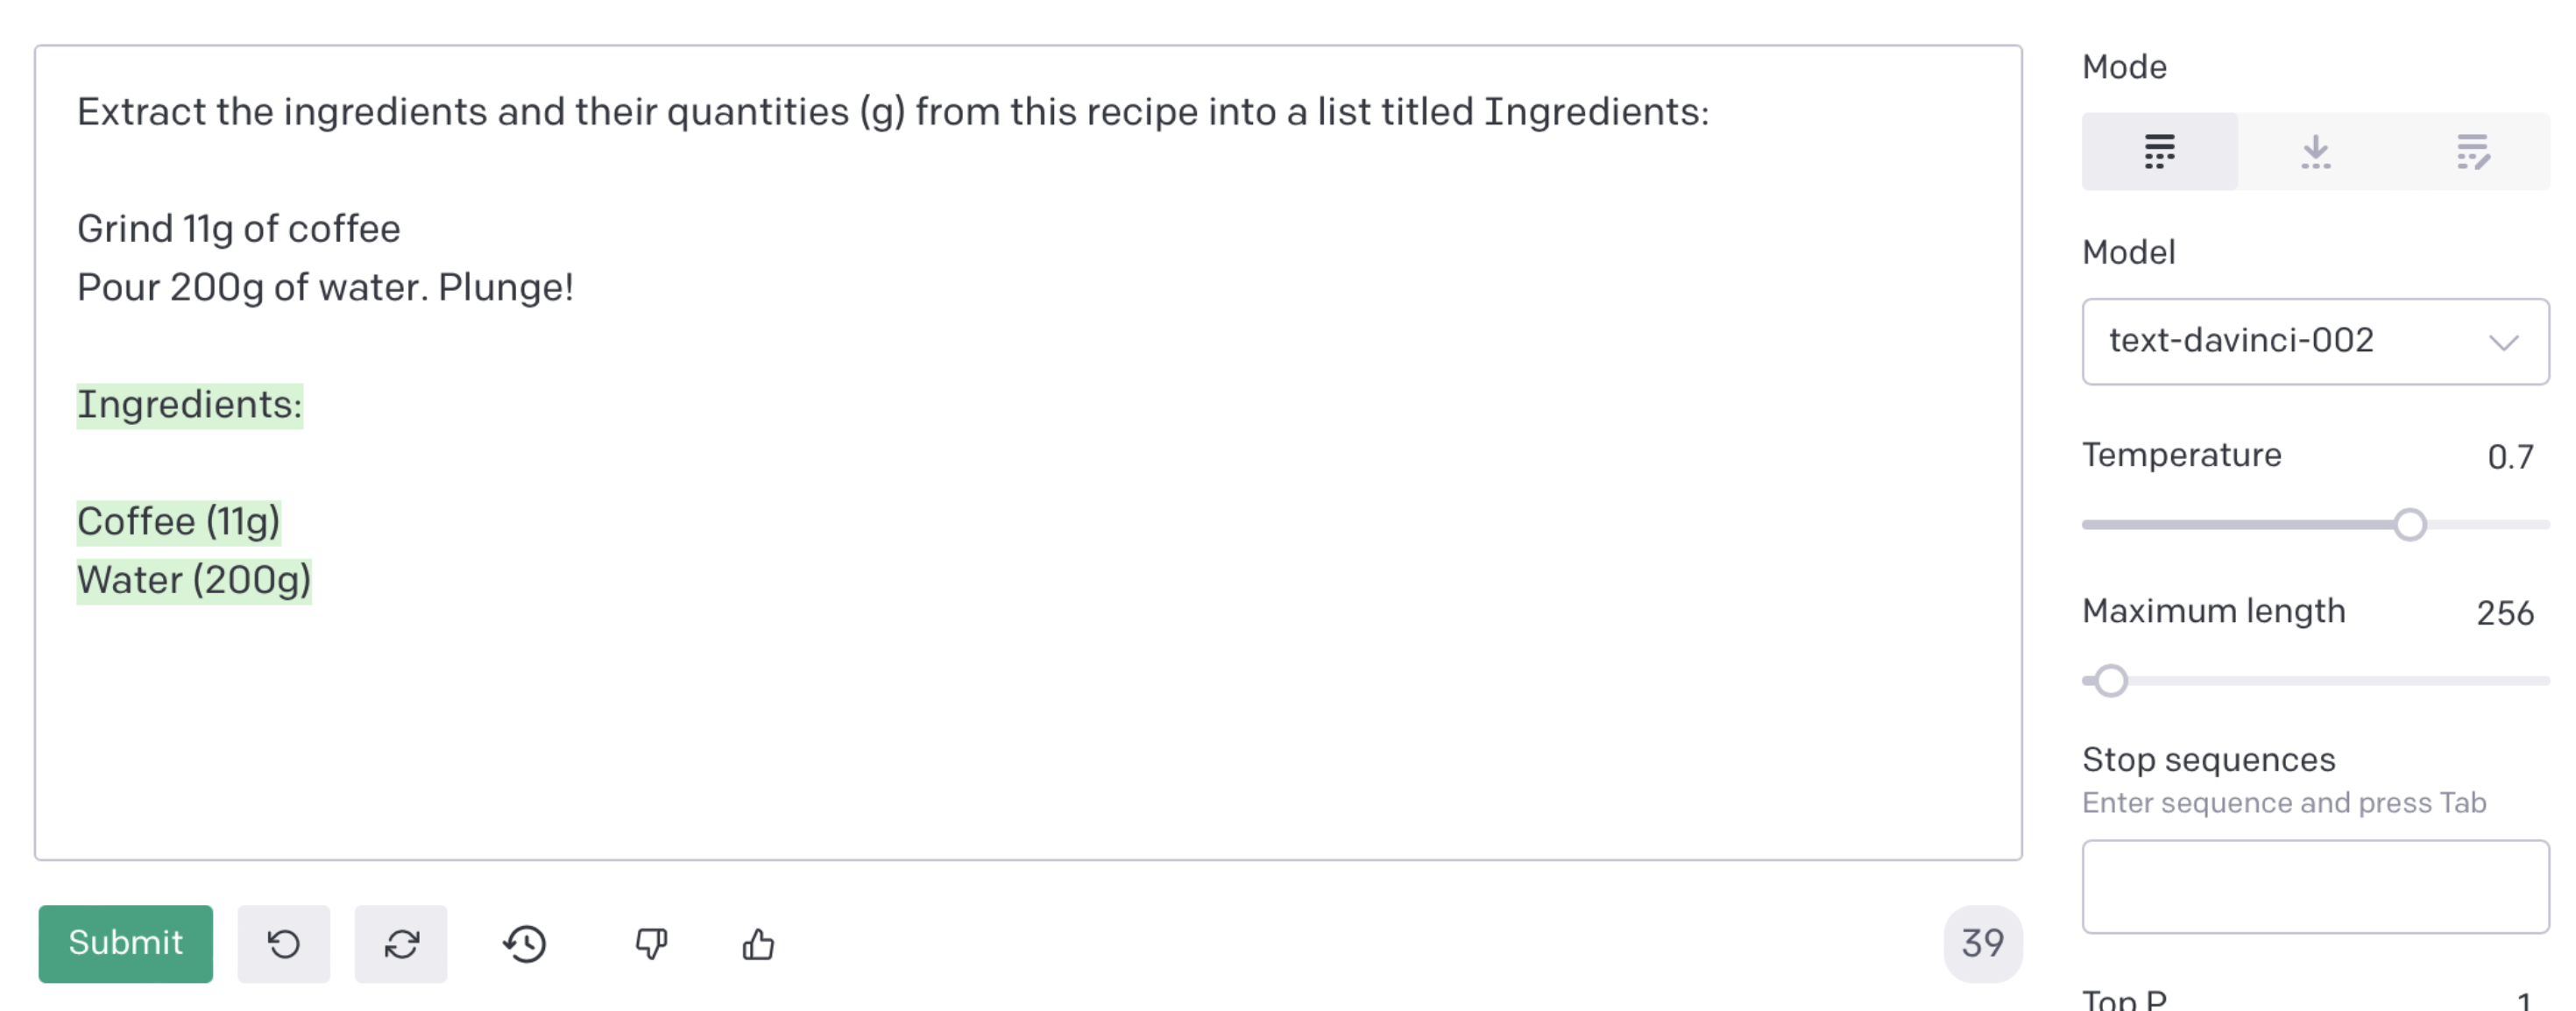 Extracting the ingredients from a recipe using GPT-3